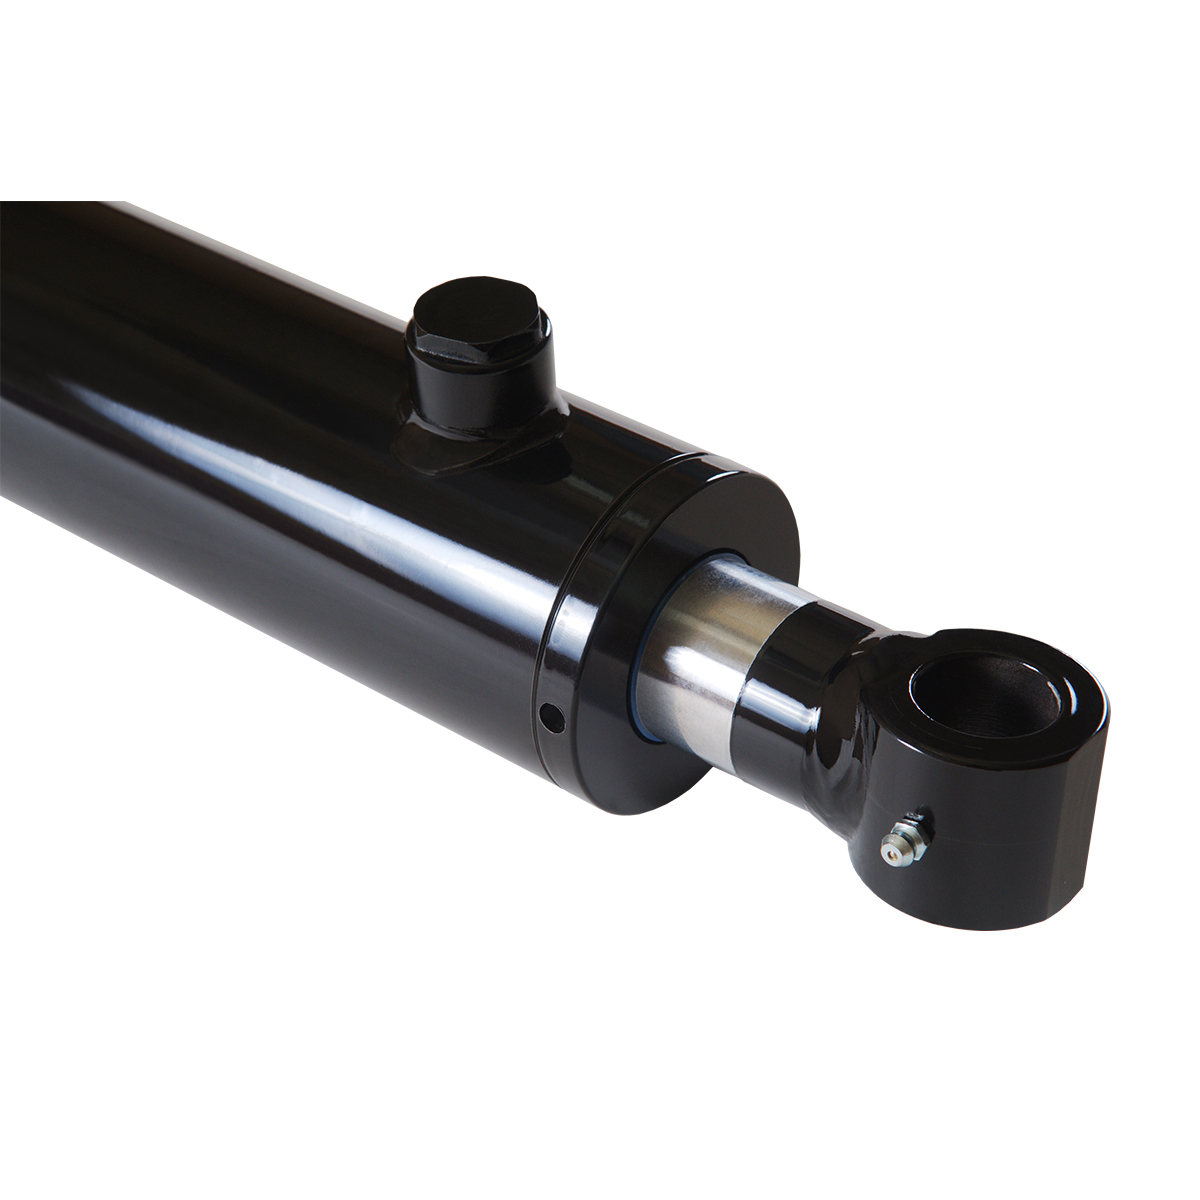 2.5 bore x 8 stroke hydraulic cylinder, welded tang double acting cylinder | Magister Hydraulics